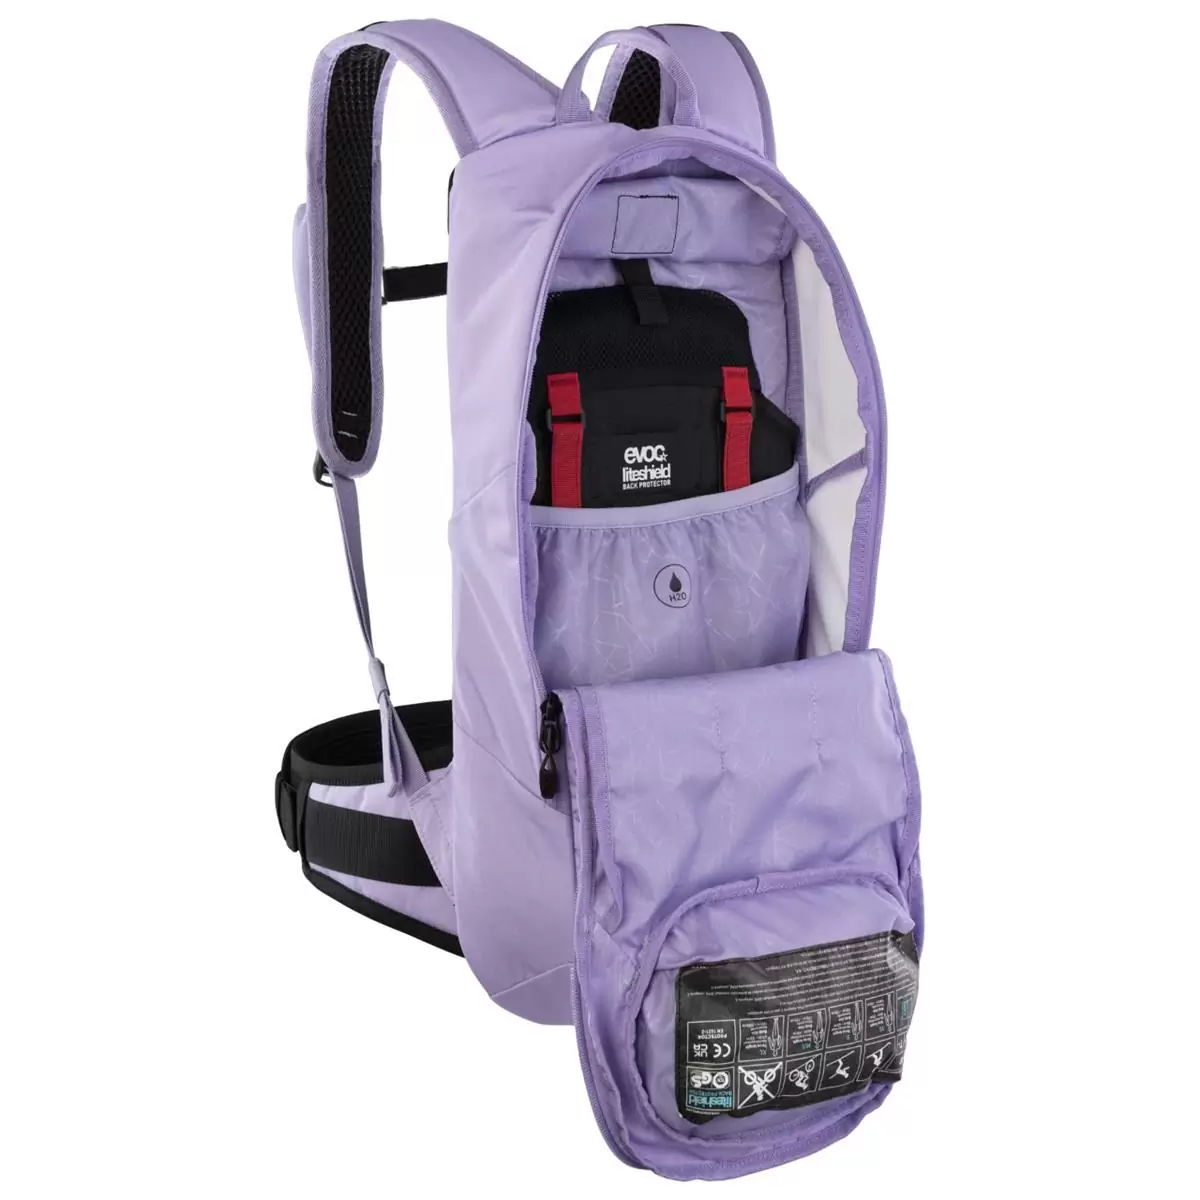 FR LITE RACE 10 Backpack With Back Protector 10L Purple Size M/L #4